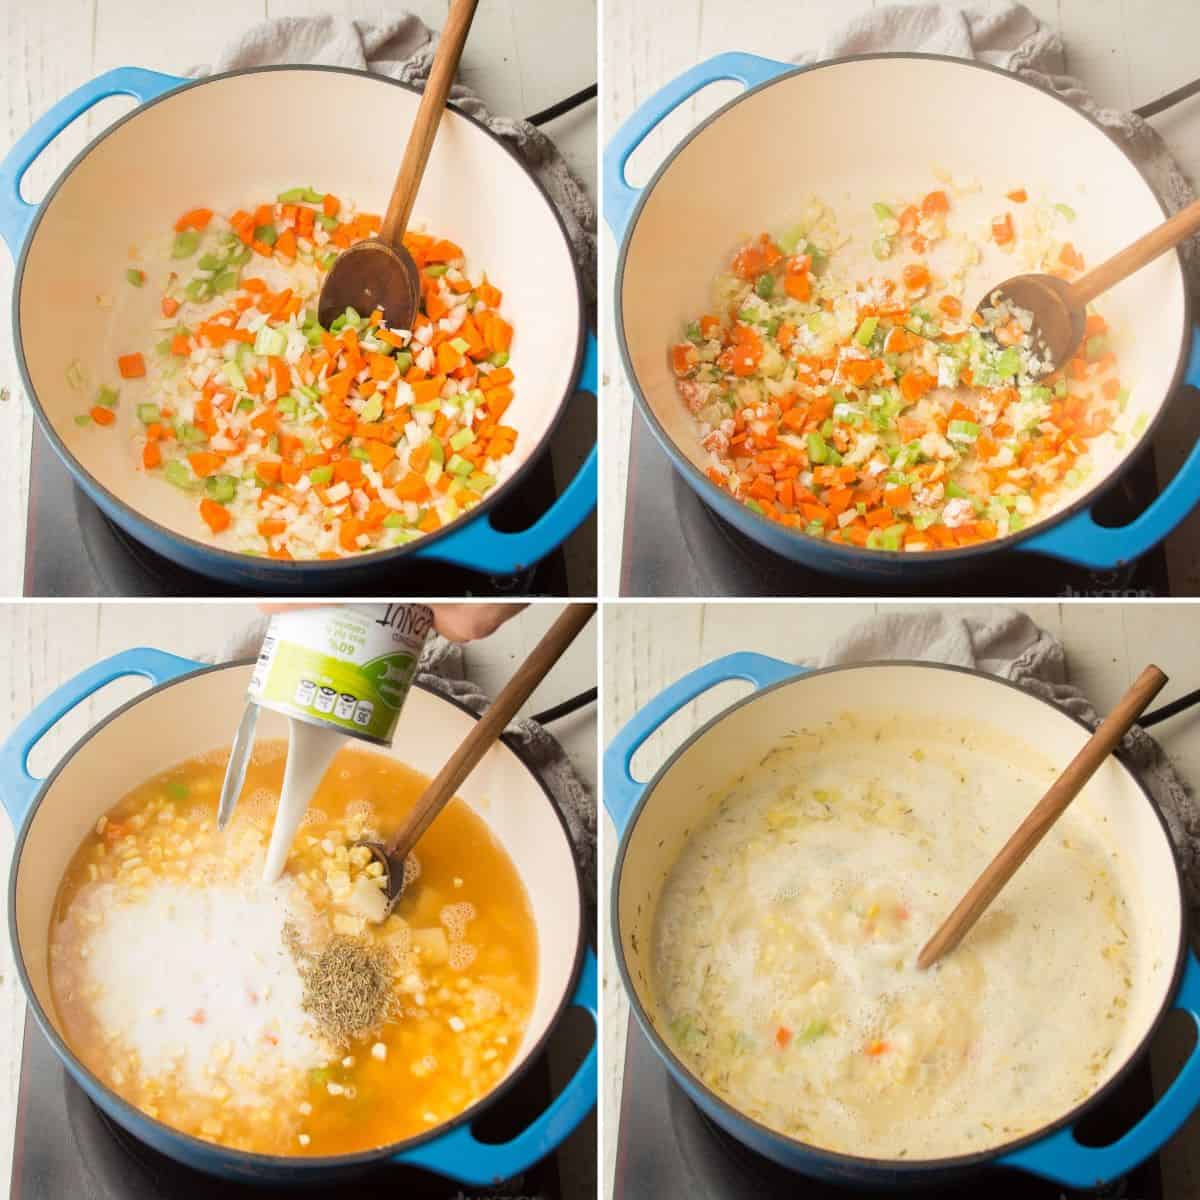 Collage Showing Steps for Making Vegan Corn Chowder: Sweat Vegetables, Add Flour, Add Spices and Liquid, and Simmer